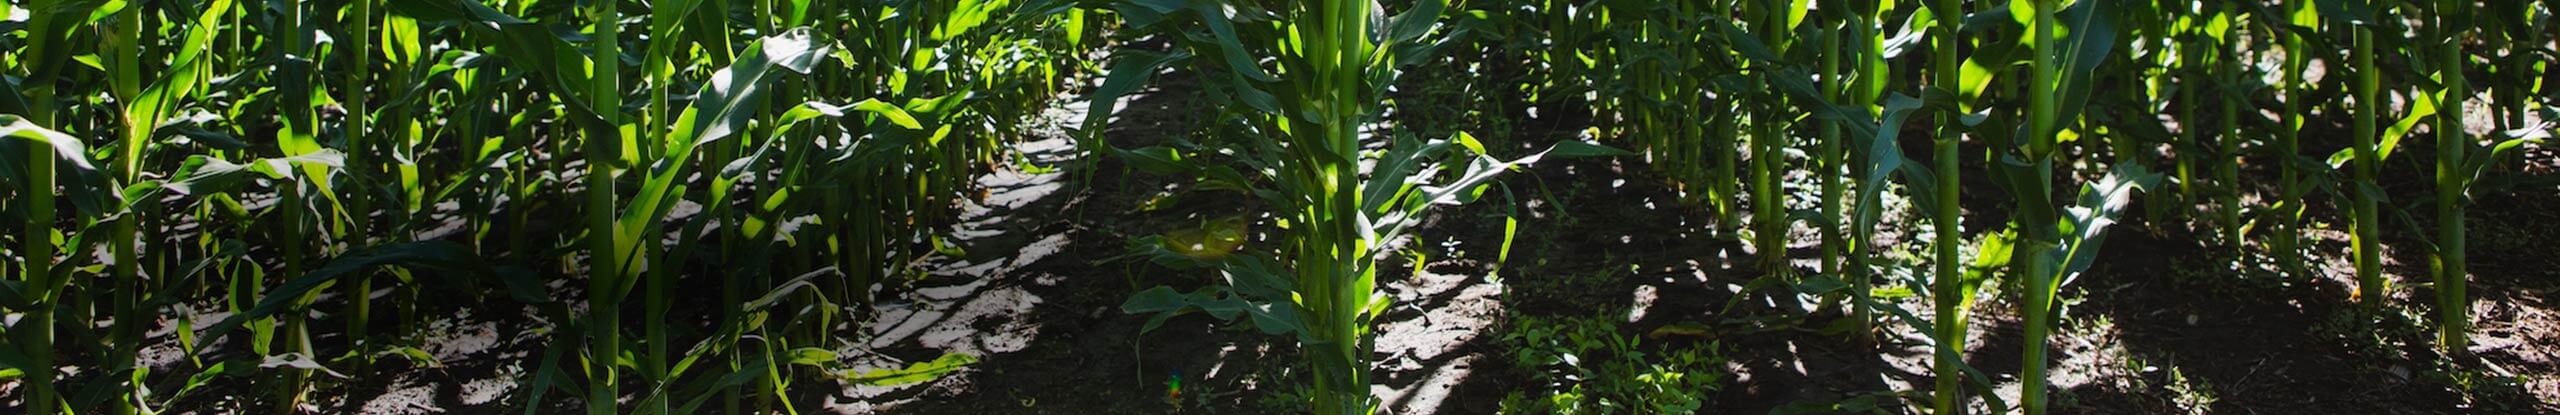 Investigating the clavibacter-corn interaction to promote resistance to Goss’s wilt